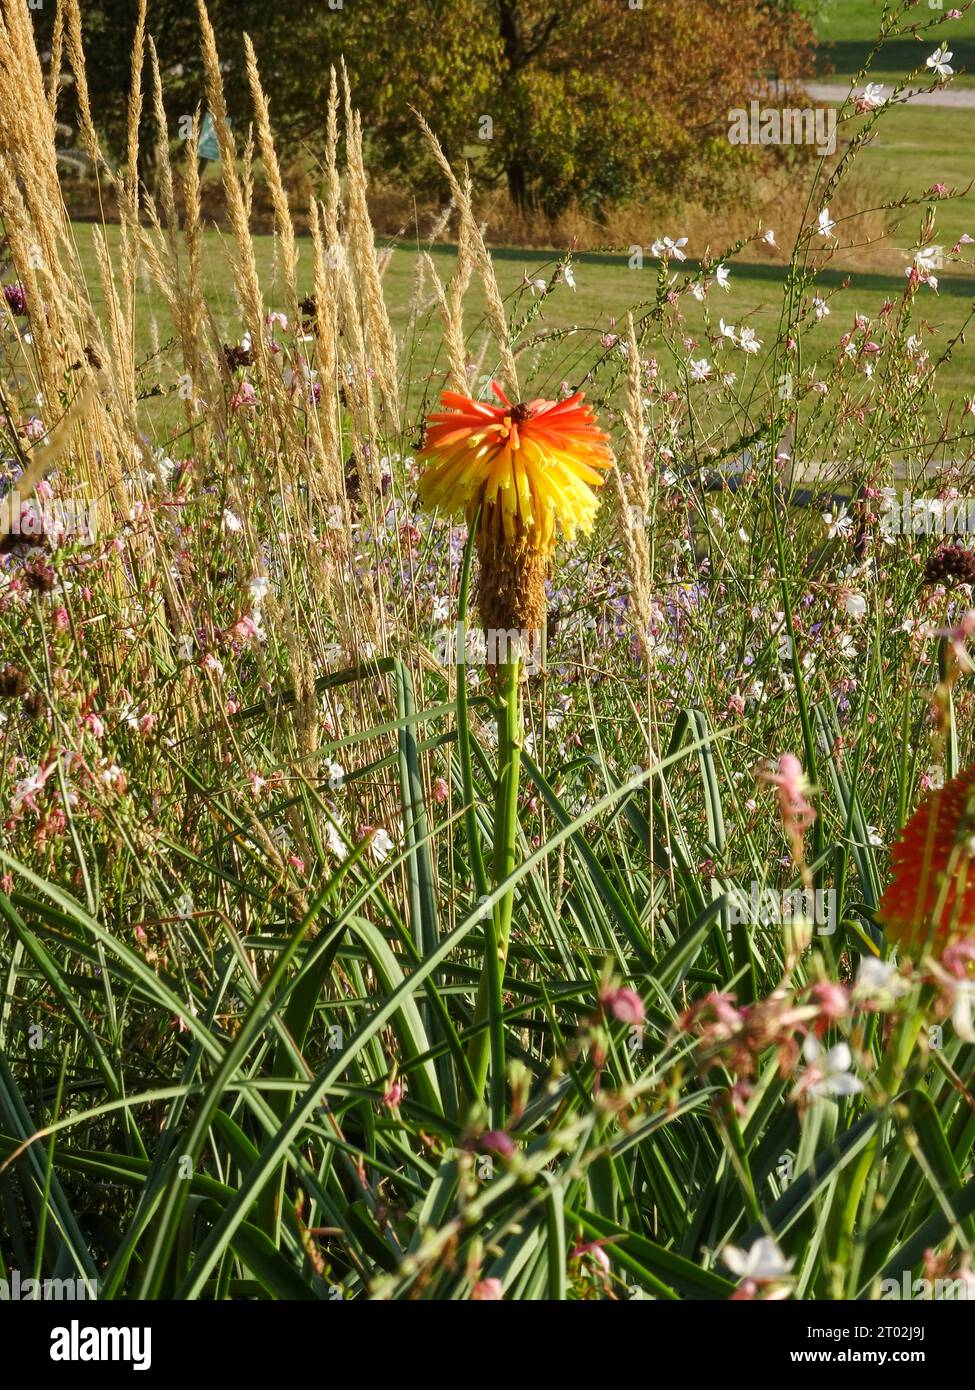 Naturally upright flowering plant Kniphofia 'Mango Popsicle’, in a bed of grasses Stock Photo